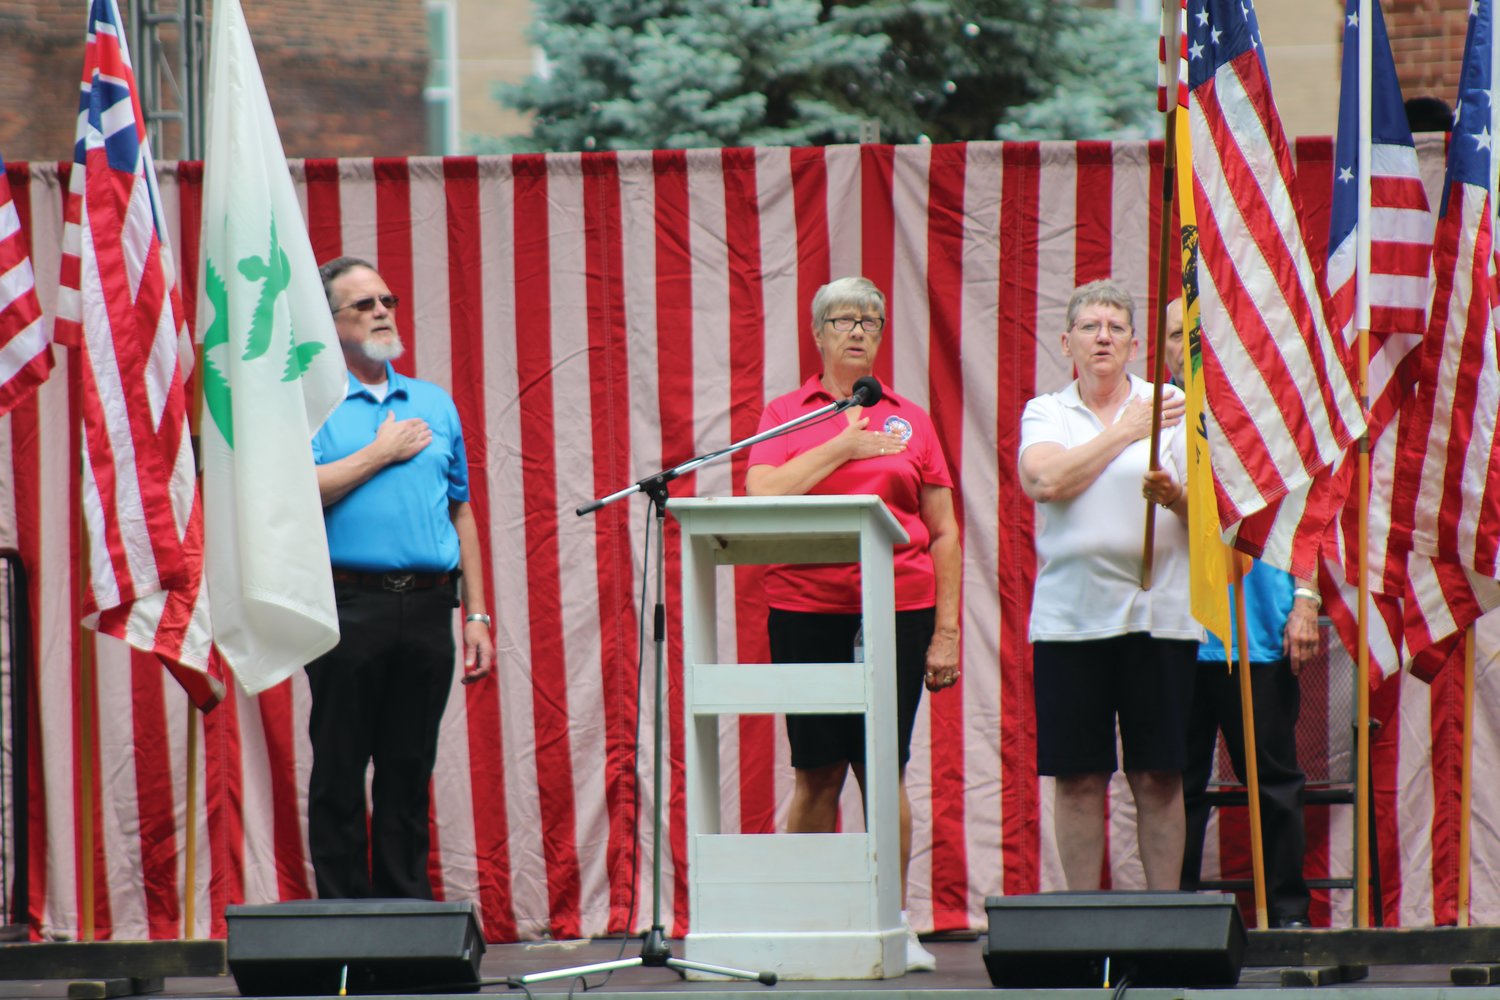 Members of the local Eagles Aerie conduct a flag ceremony and lead the crowd in the Pledge of Allegiance on Friday to open the annual Crawfordsville Strawberry Festival. The festival continues with live entertainment, food, arts and crafts and children’s activities 11 a.m. to 10 p.m. Saturday and 11 a.m. to 4 p.m. Sunday at Lane Place, 212 S. Water St.